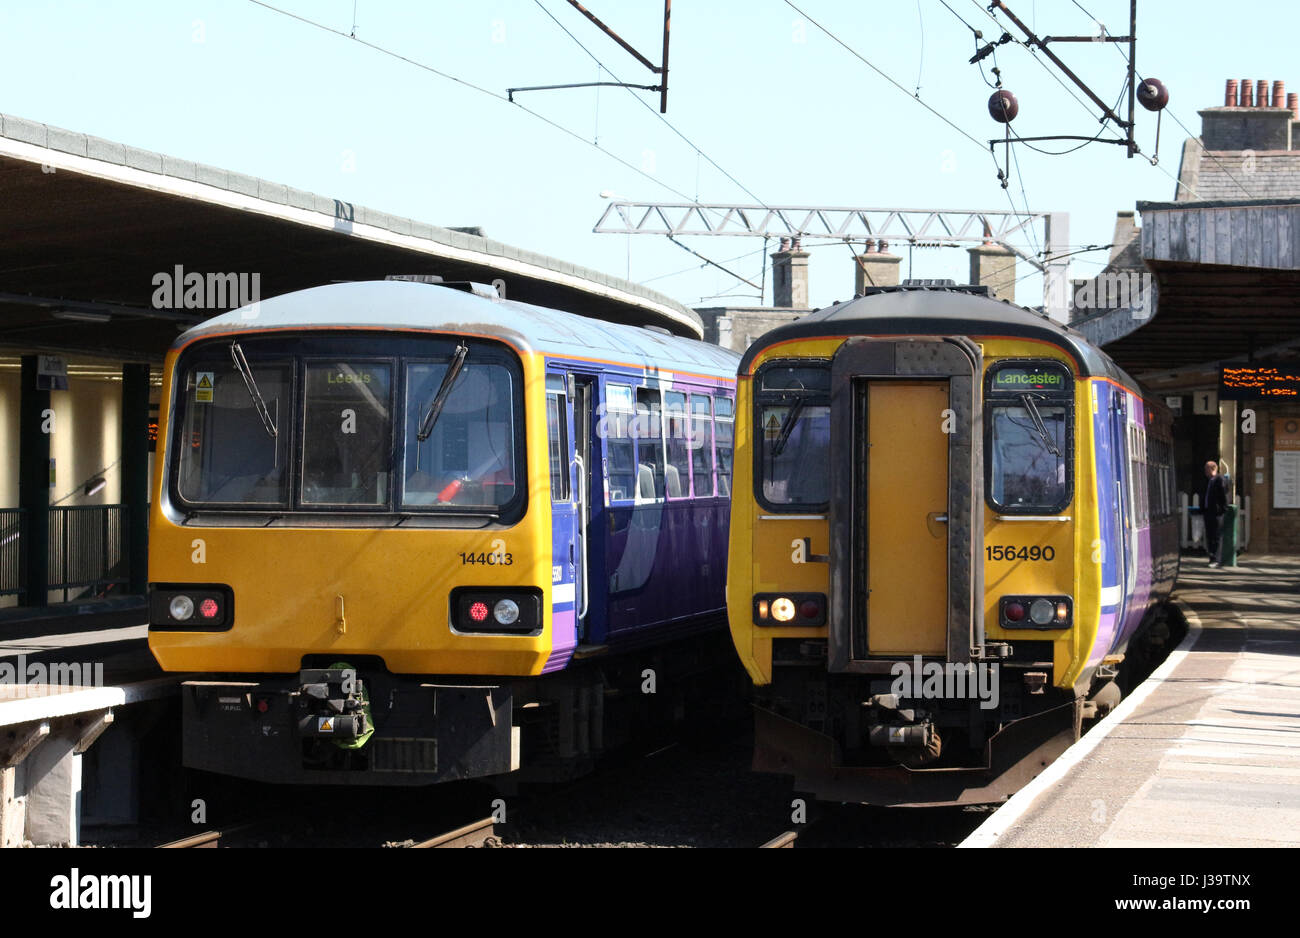 Two diesel multiple unit trains operated by Arrive Trains North in platforms 1 and 2 at Carnforth. Class 144 Pacer and class 156 Super Sprinter. Stock Photo